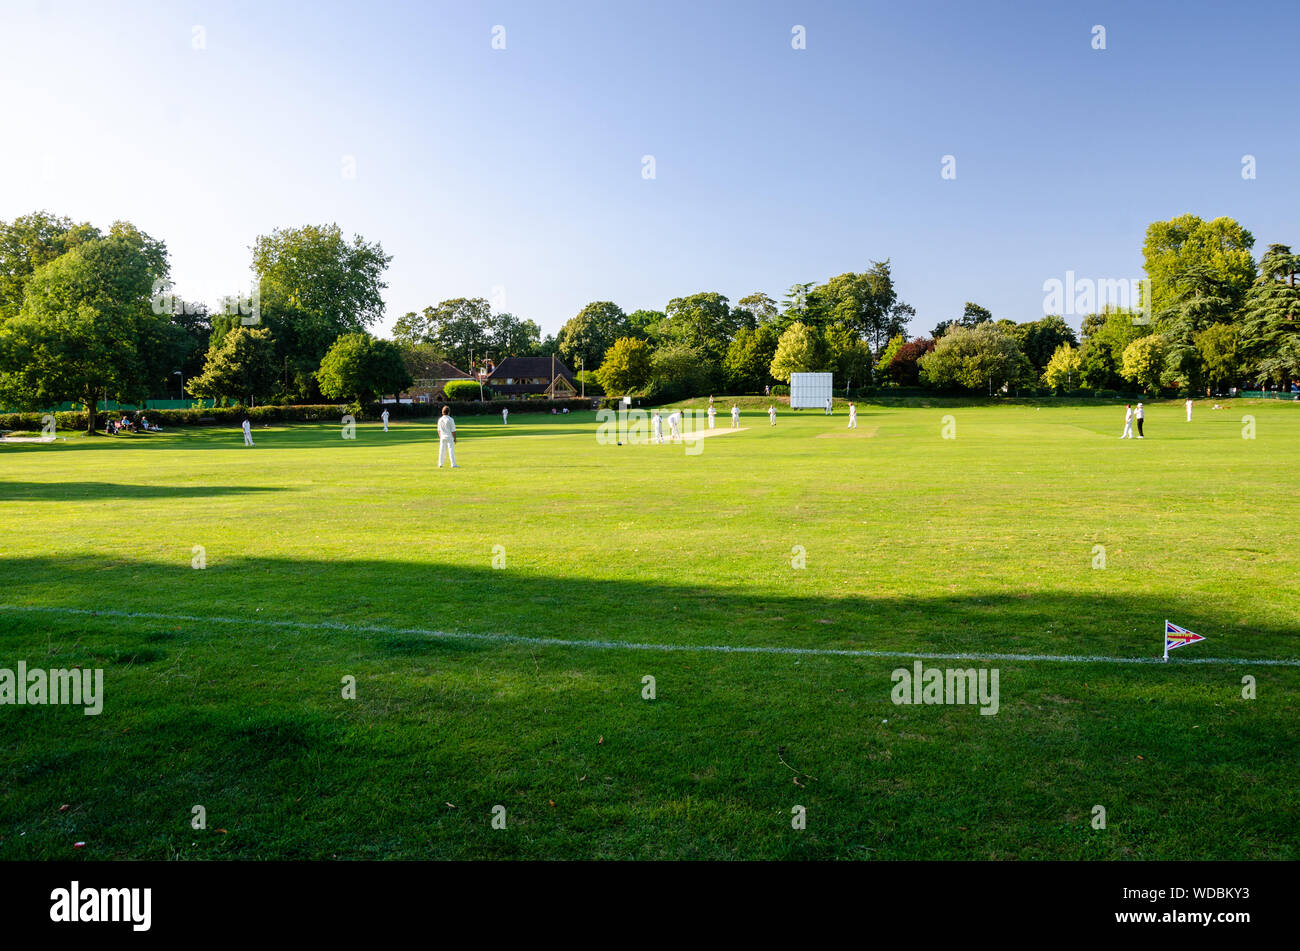 A game of cricket being played at Marlow in Buckinghamshire, UK Stock Photo